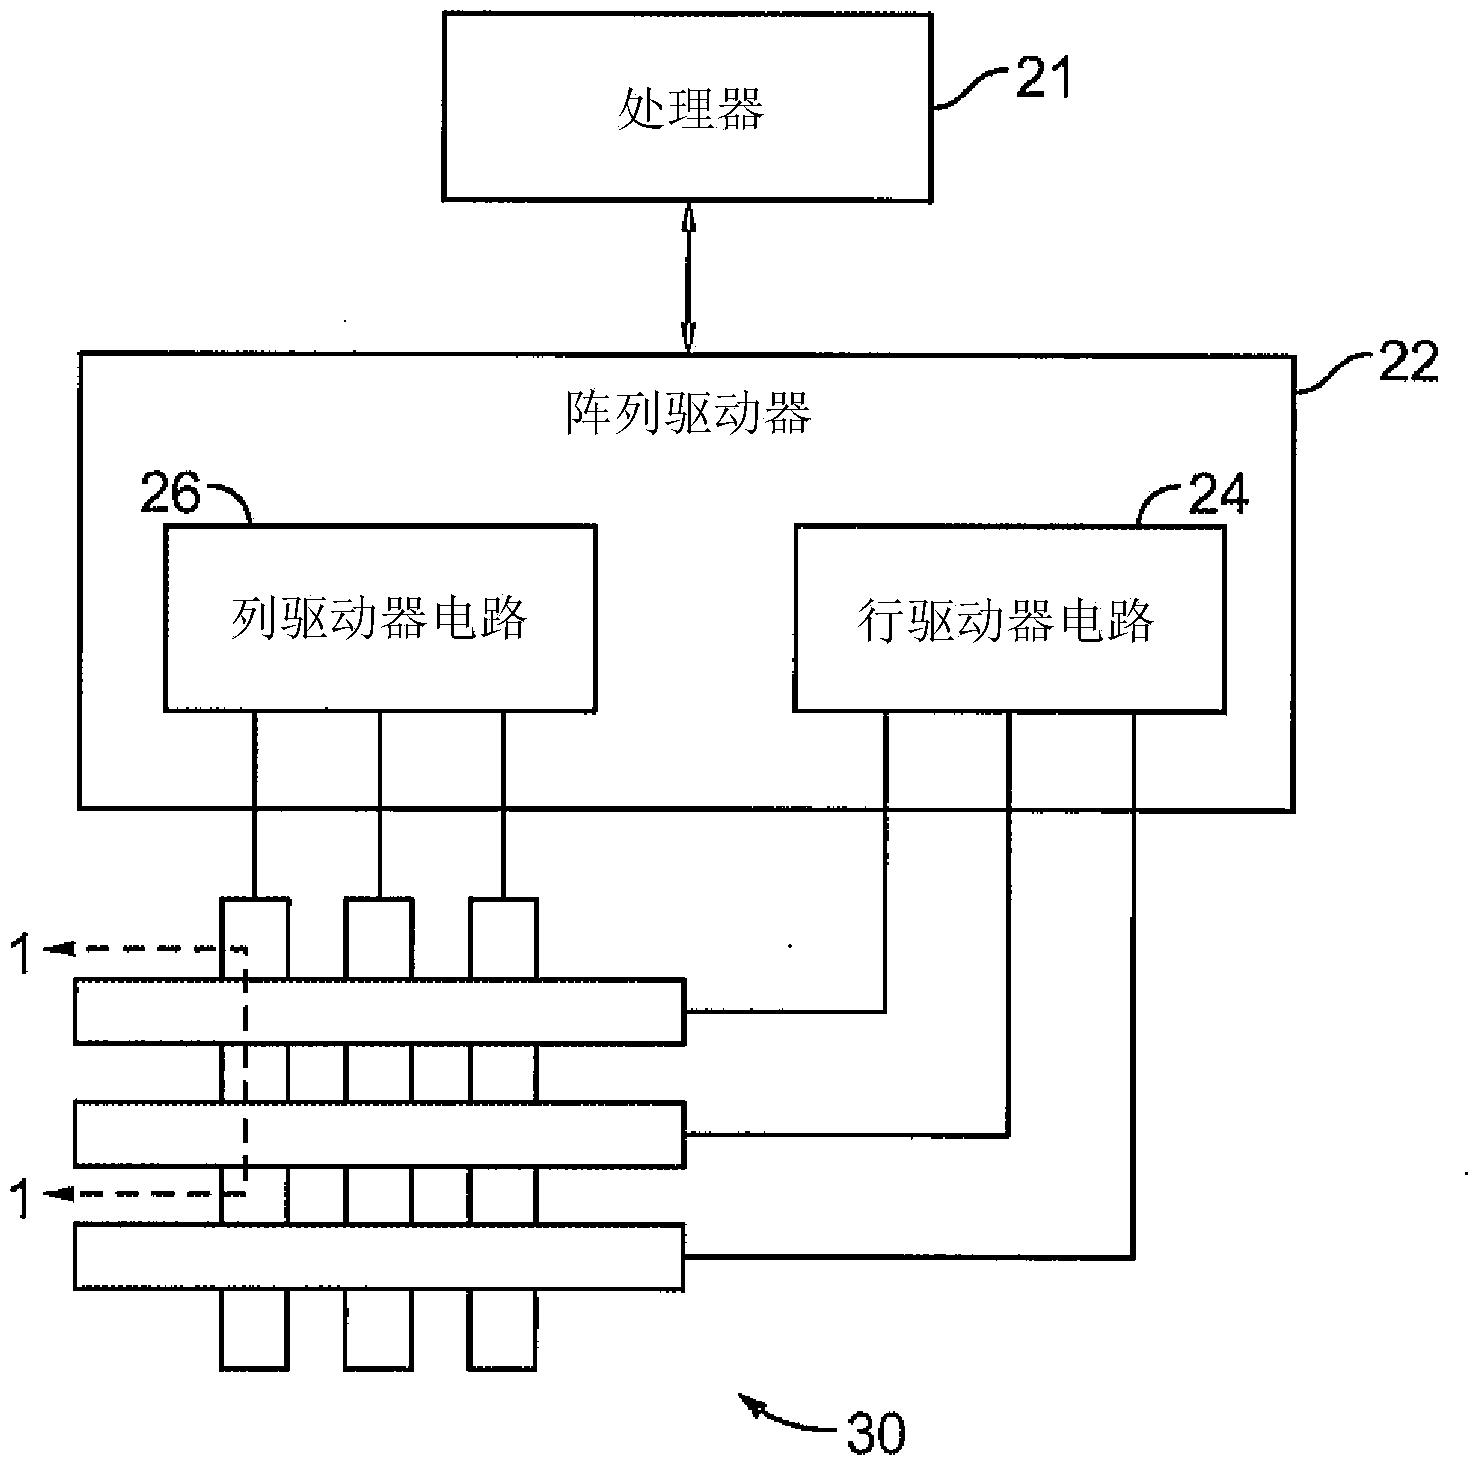 Wiring and periphery for integrated capacitive touch devices